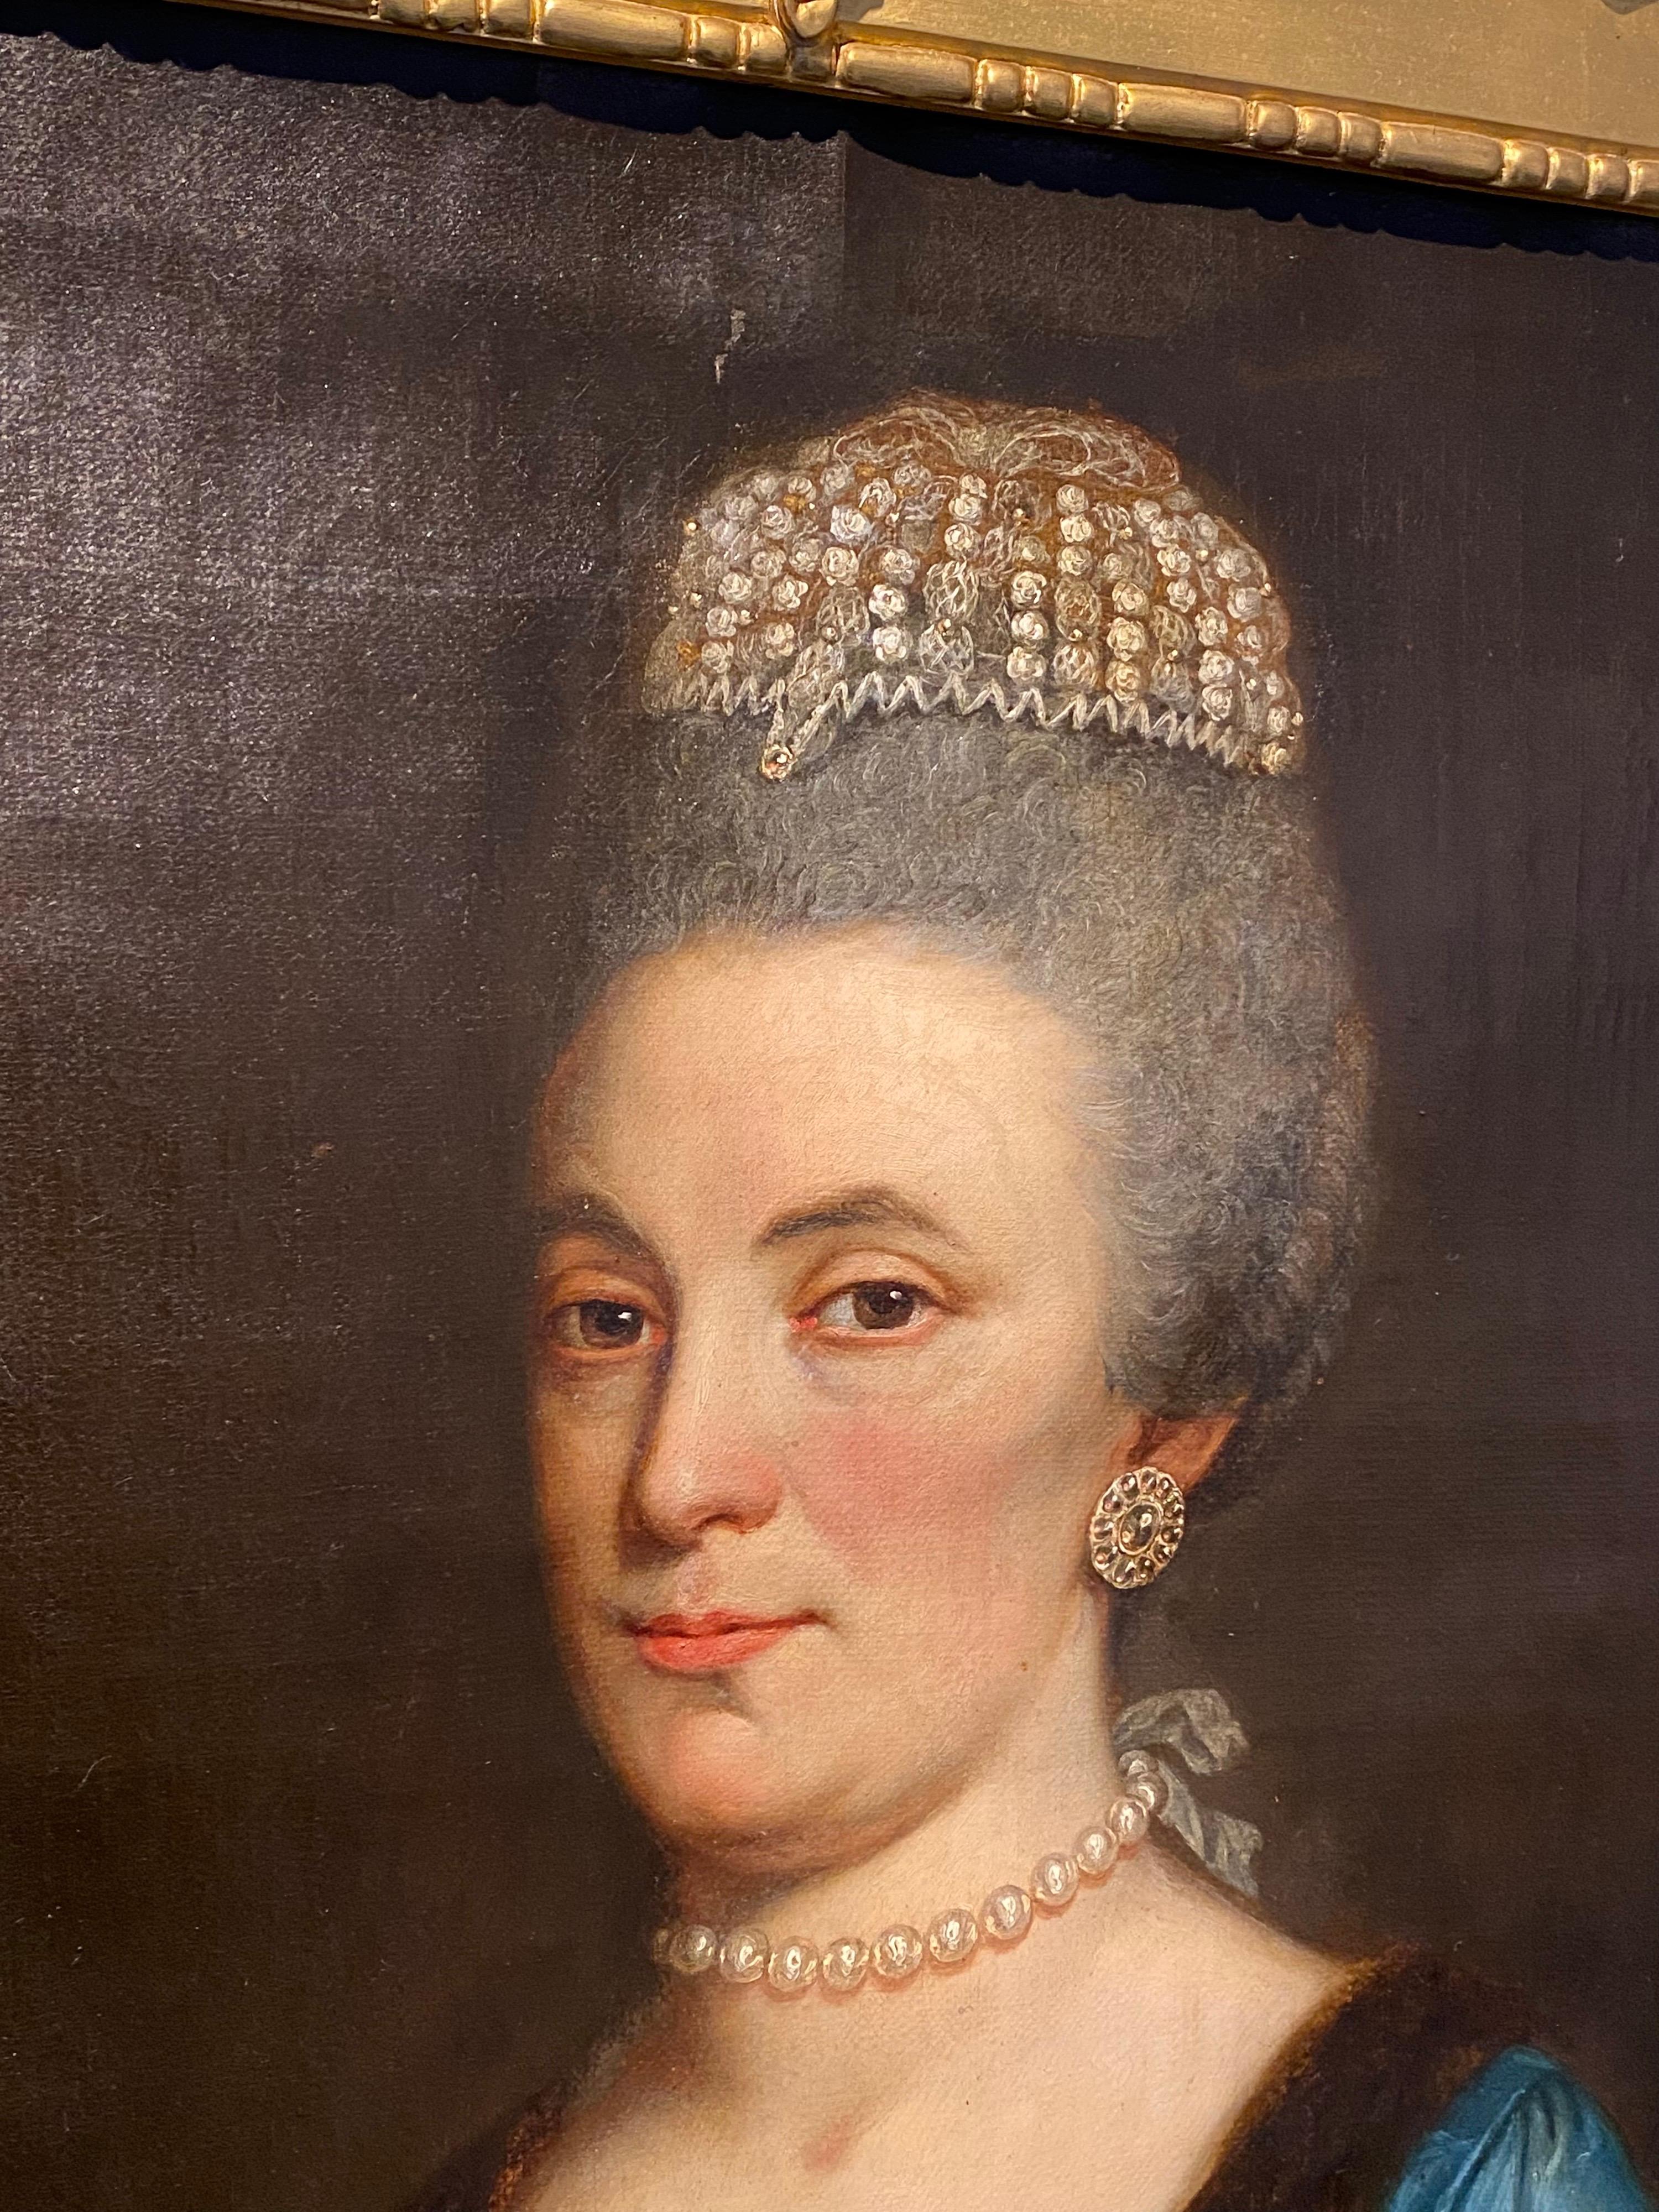 French 18th century Portrait of a lady - Book pearls - Old Masters Painting by Donatien Nonotte (Besançon 1708 - Lyon 1785)